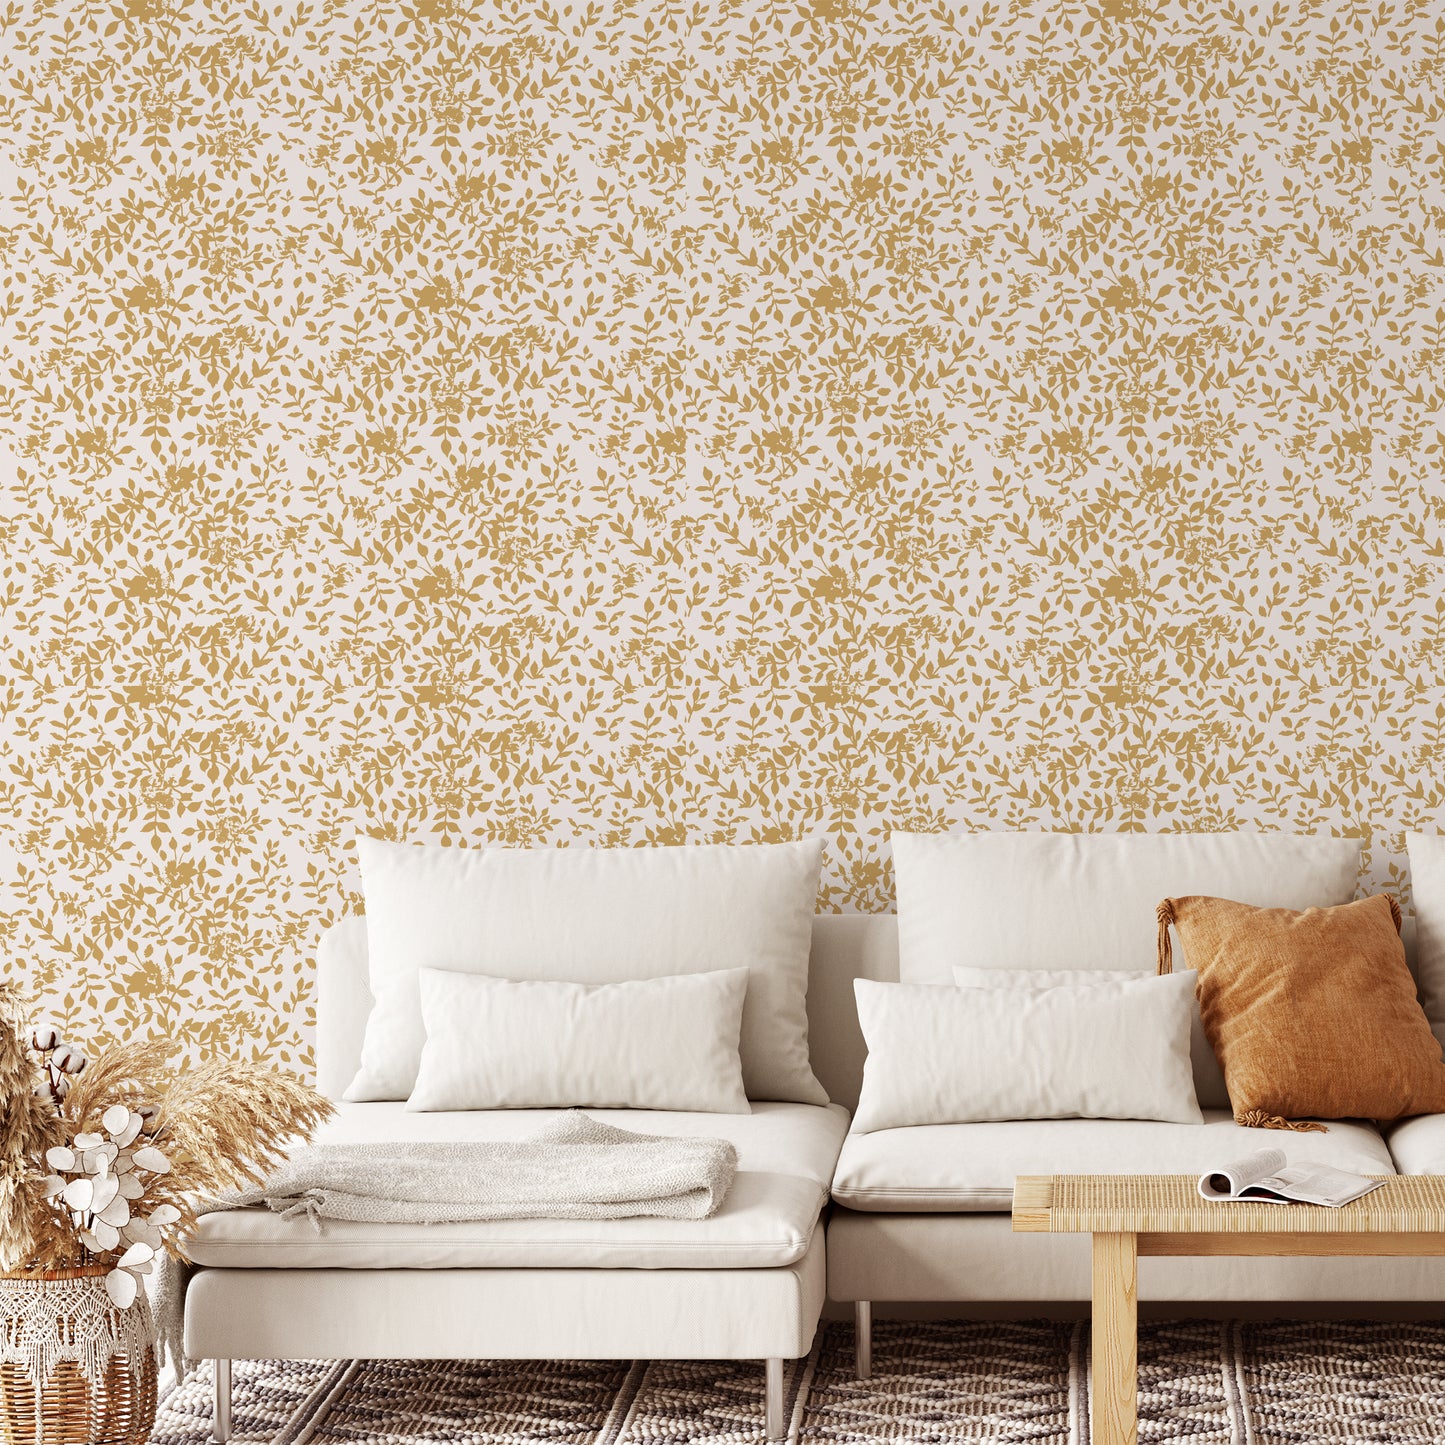 Living room wall featuring the Florence Peel and Stick Wallpaper in Ochre yellow and white by Jackie O'Bosky. These floral silhouettes make a beautiful accent wall or statement wall!